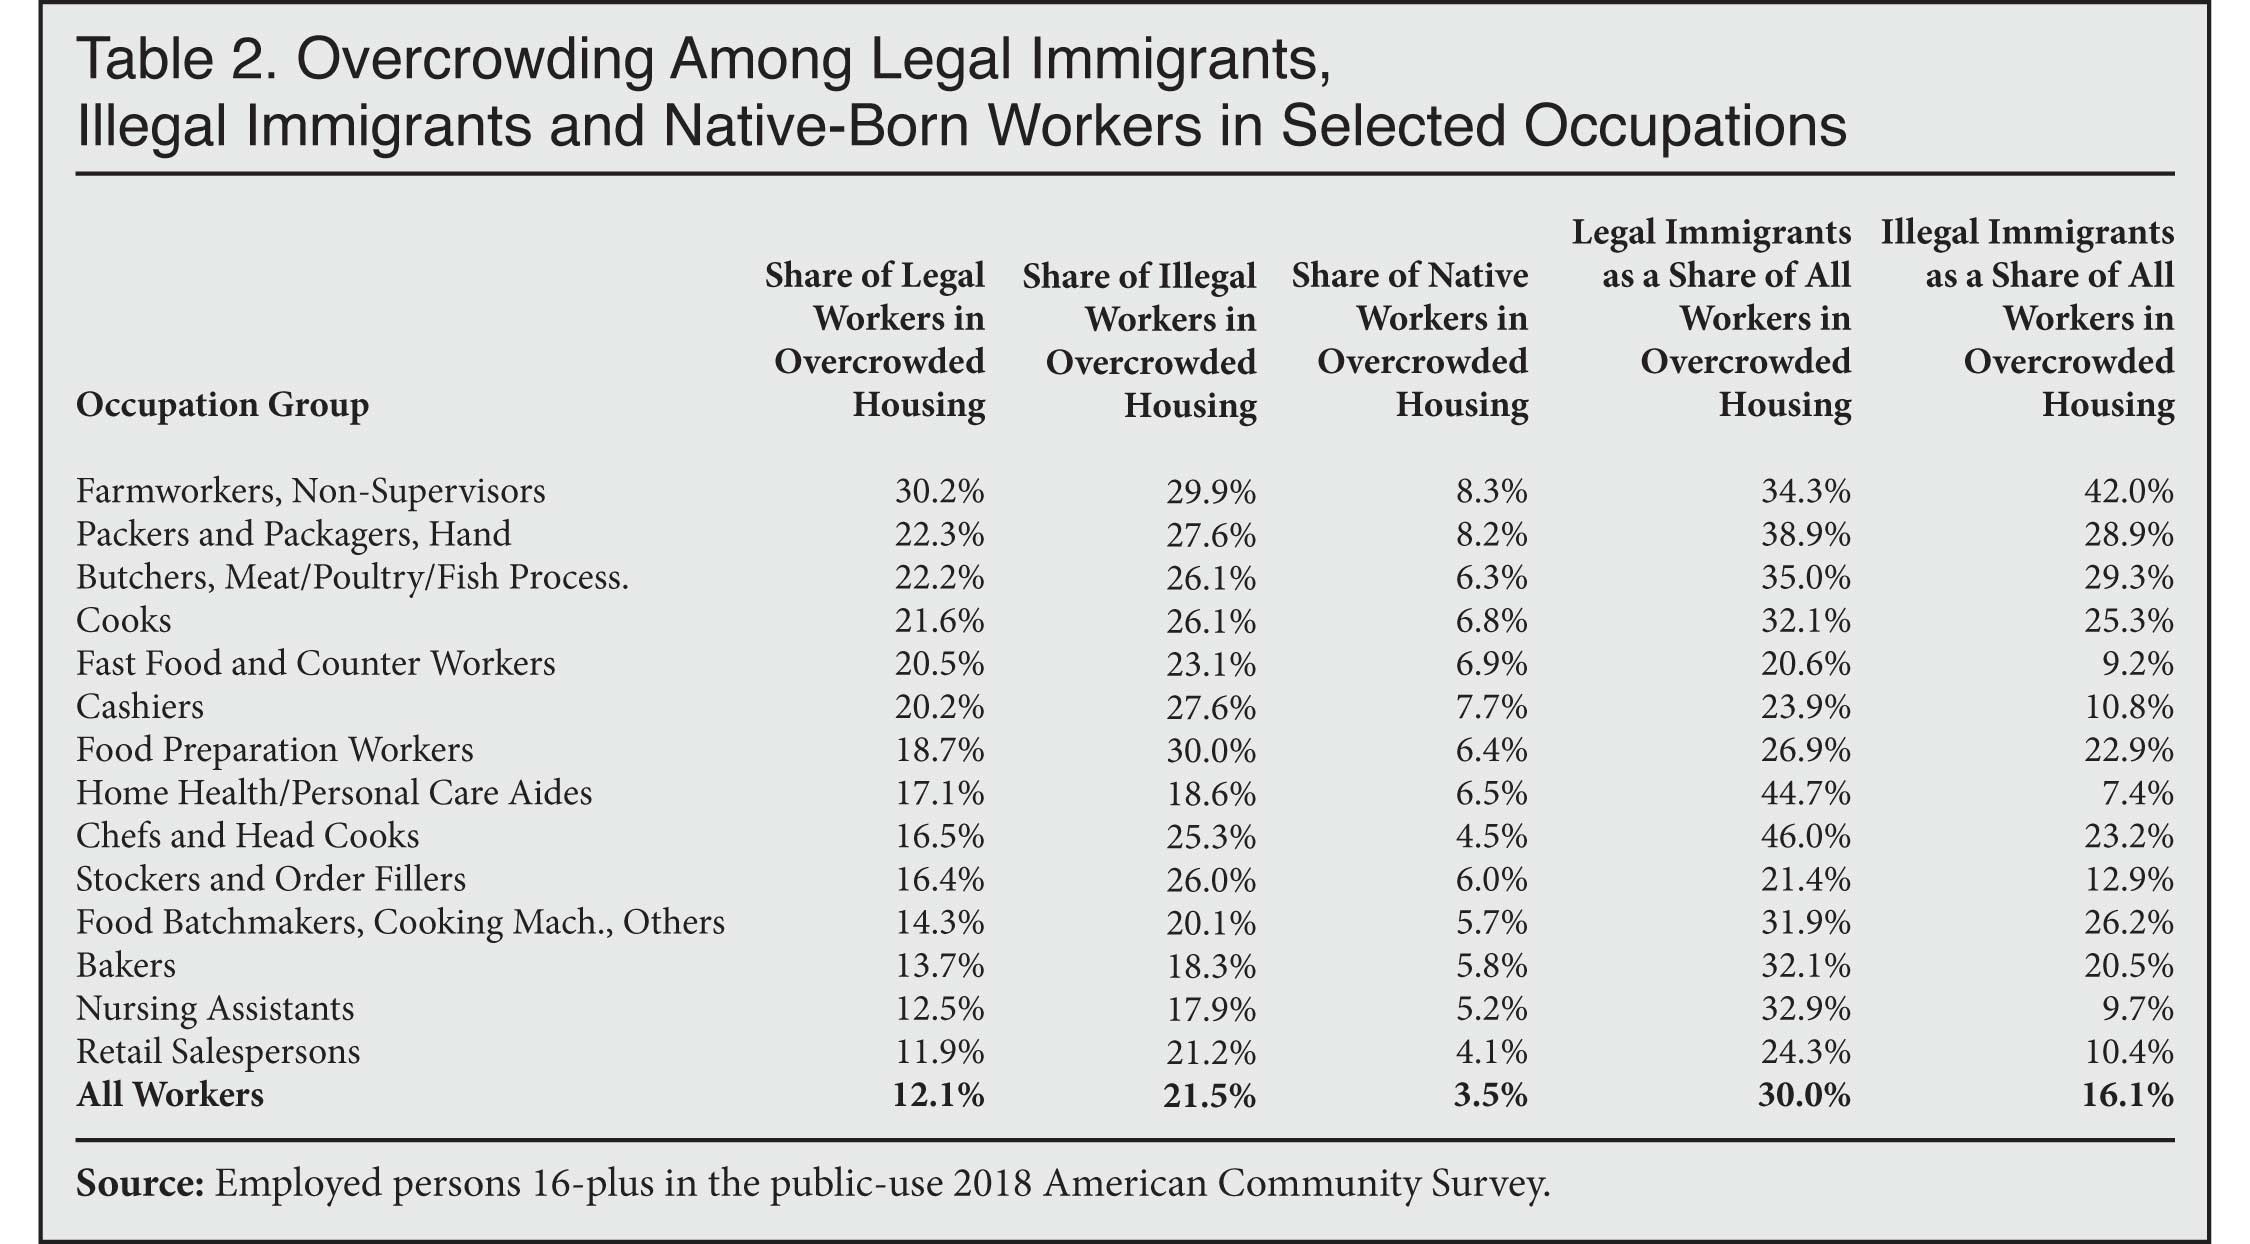 Table: Overcrowding among legal immigrants, illegal immigrants, and native born workers in select occupations